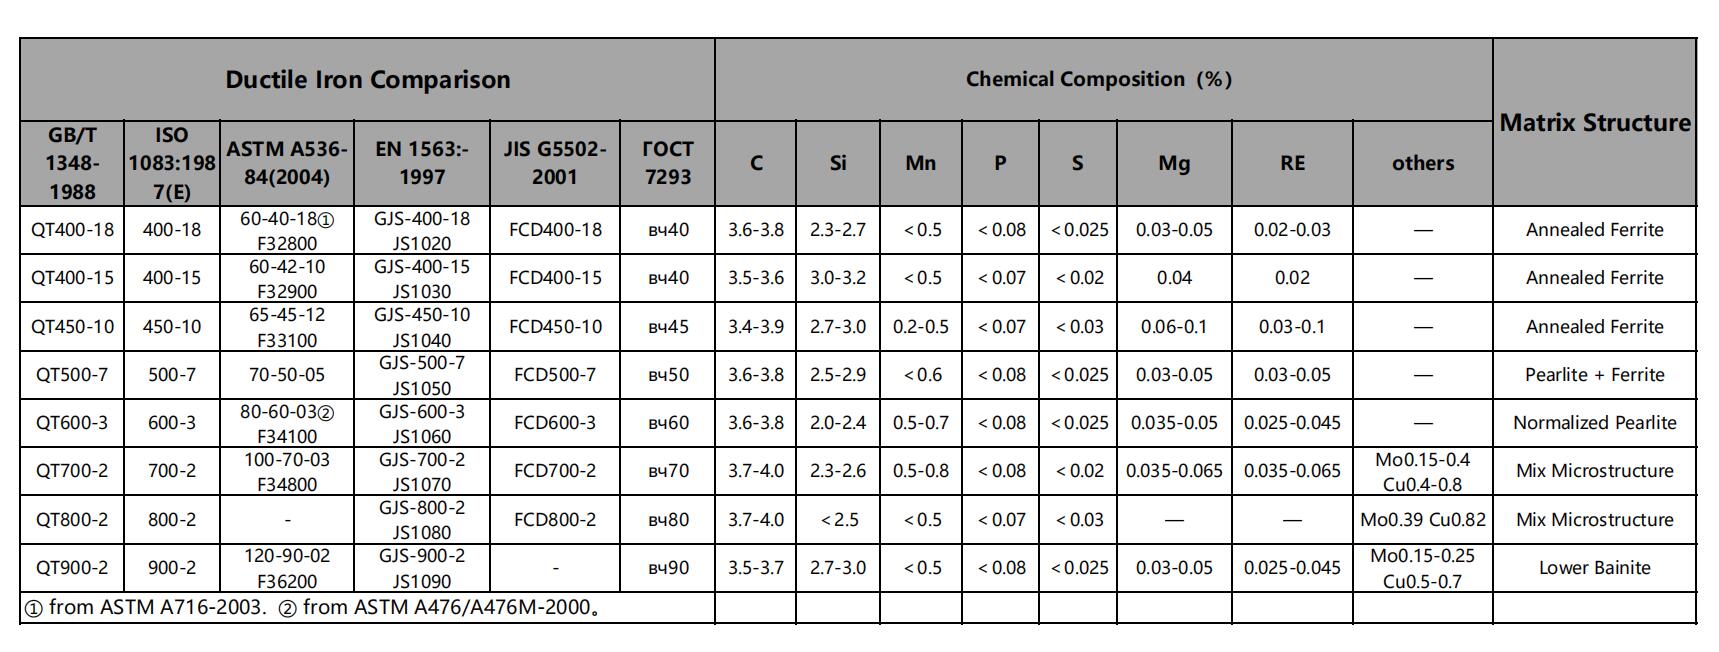 ductile iron chemical composition